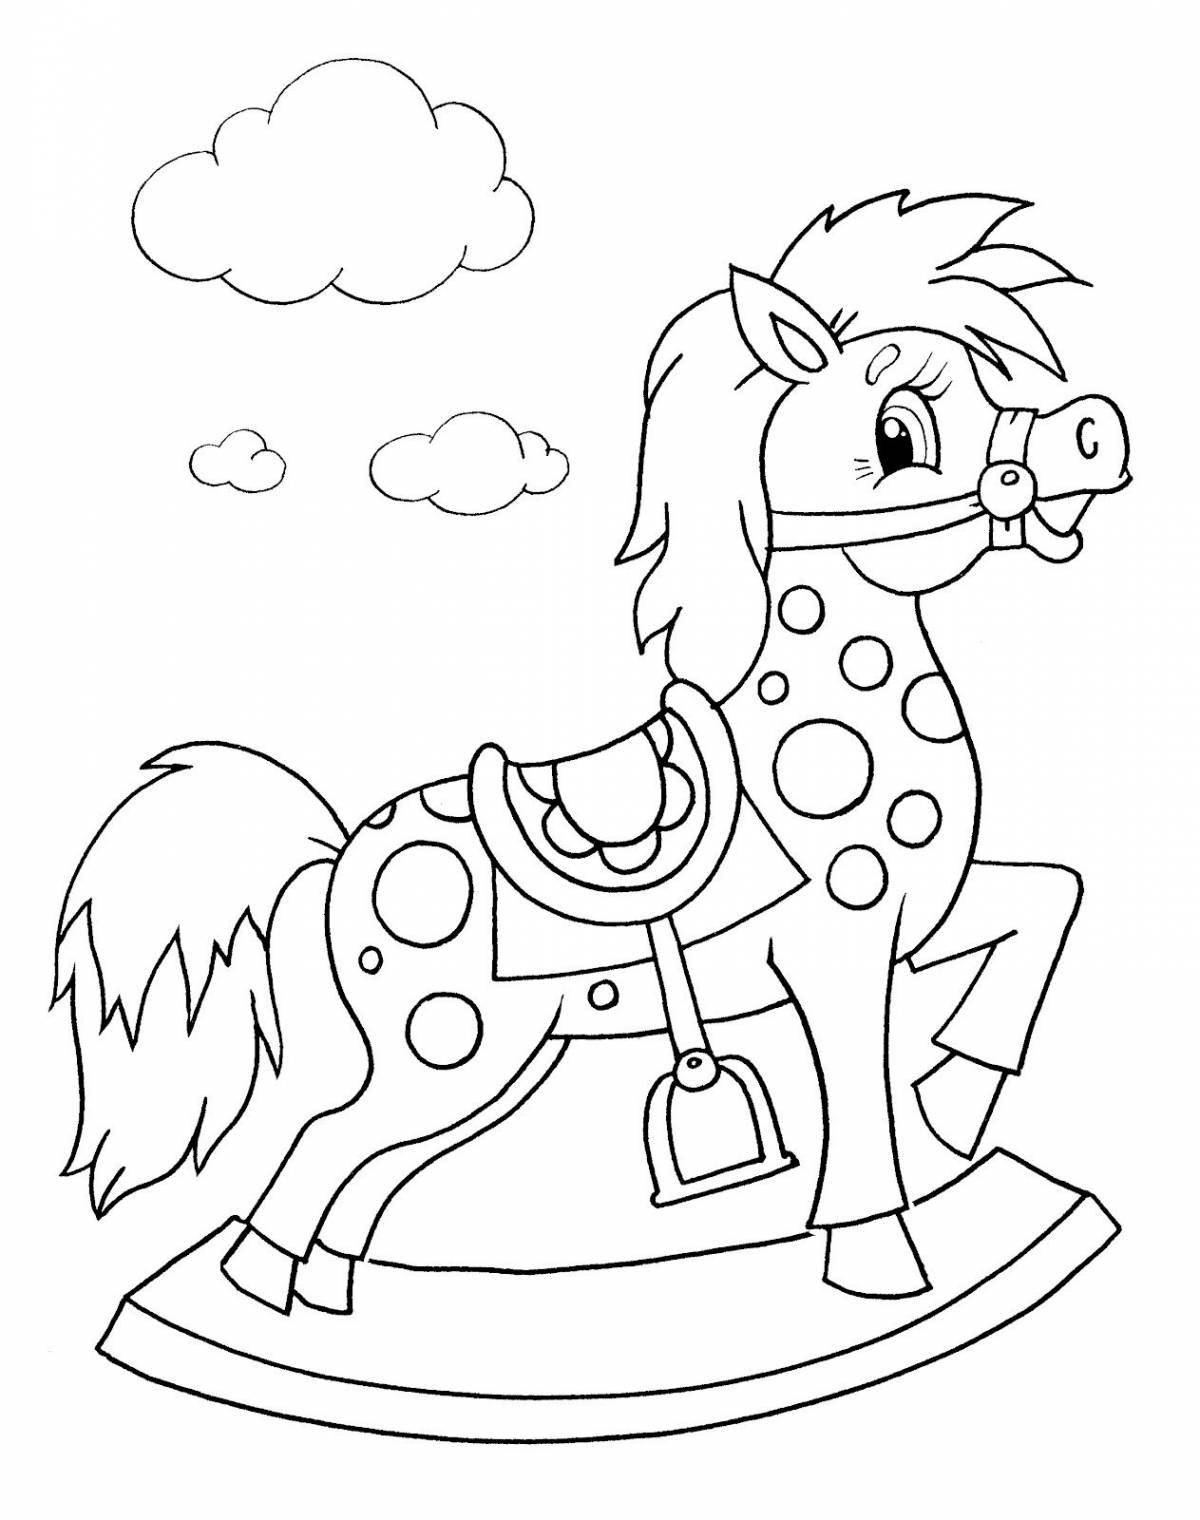 Playful coloring book for children